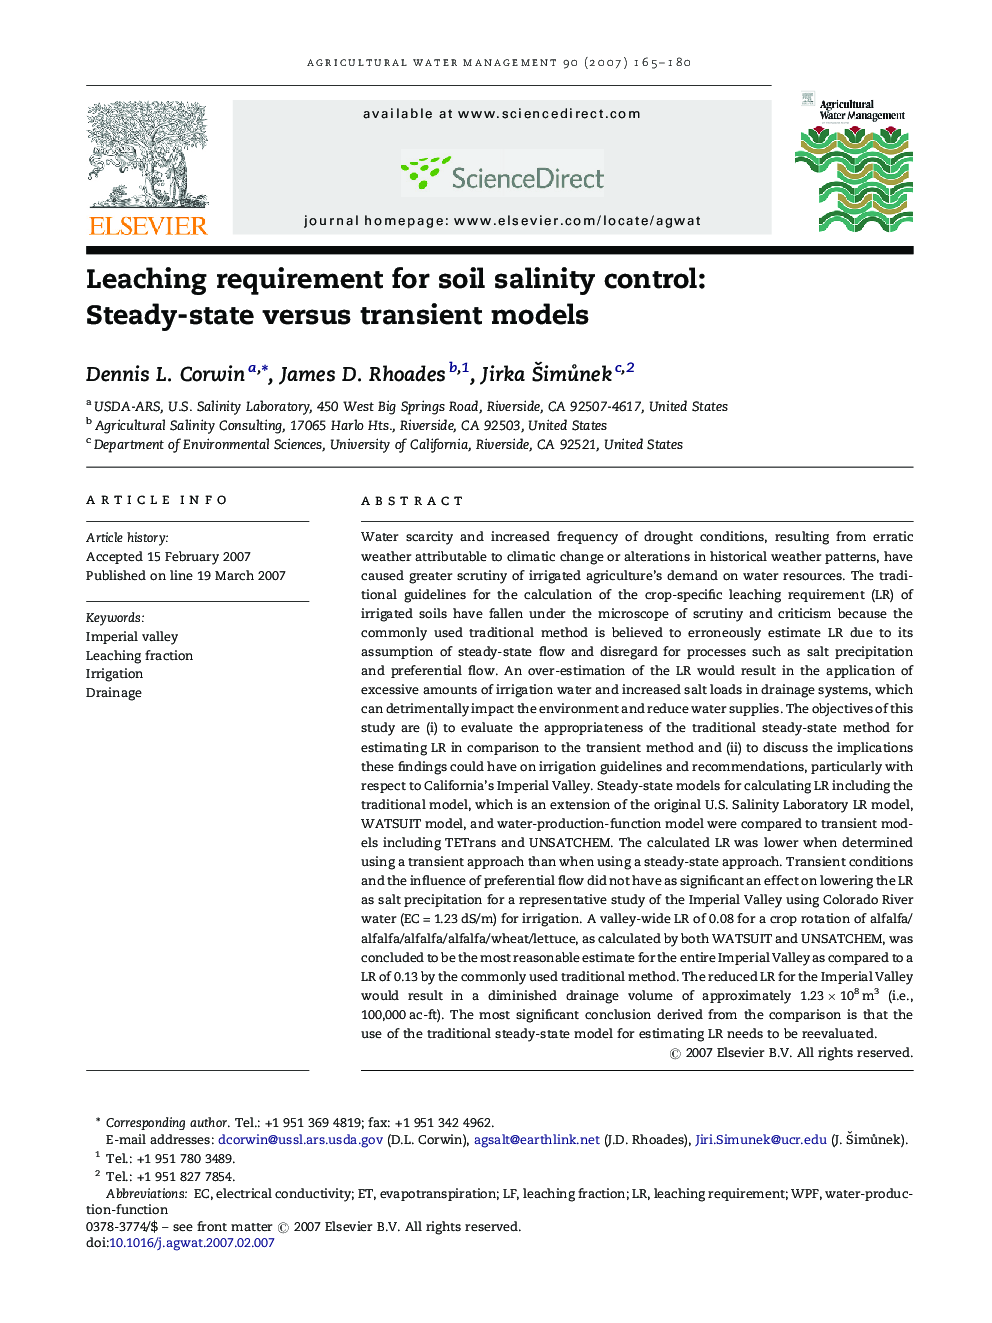 Leaching requirement for soil salinity control: Steady-state versus transient models